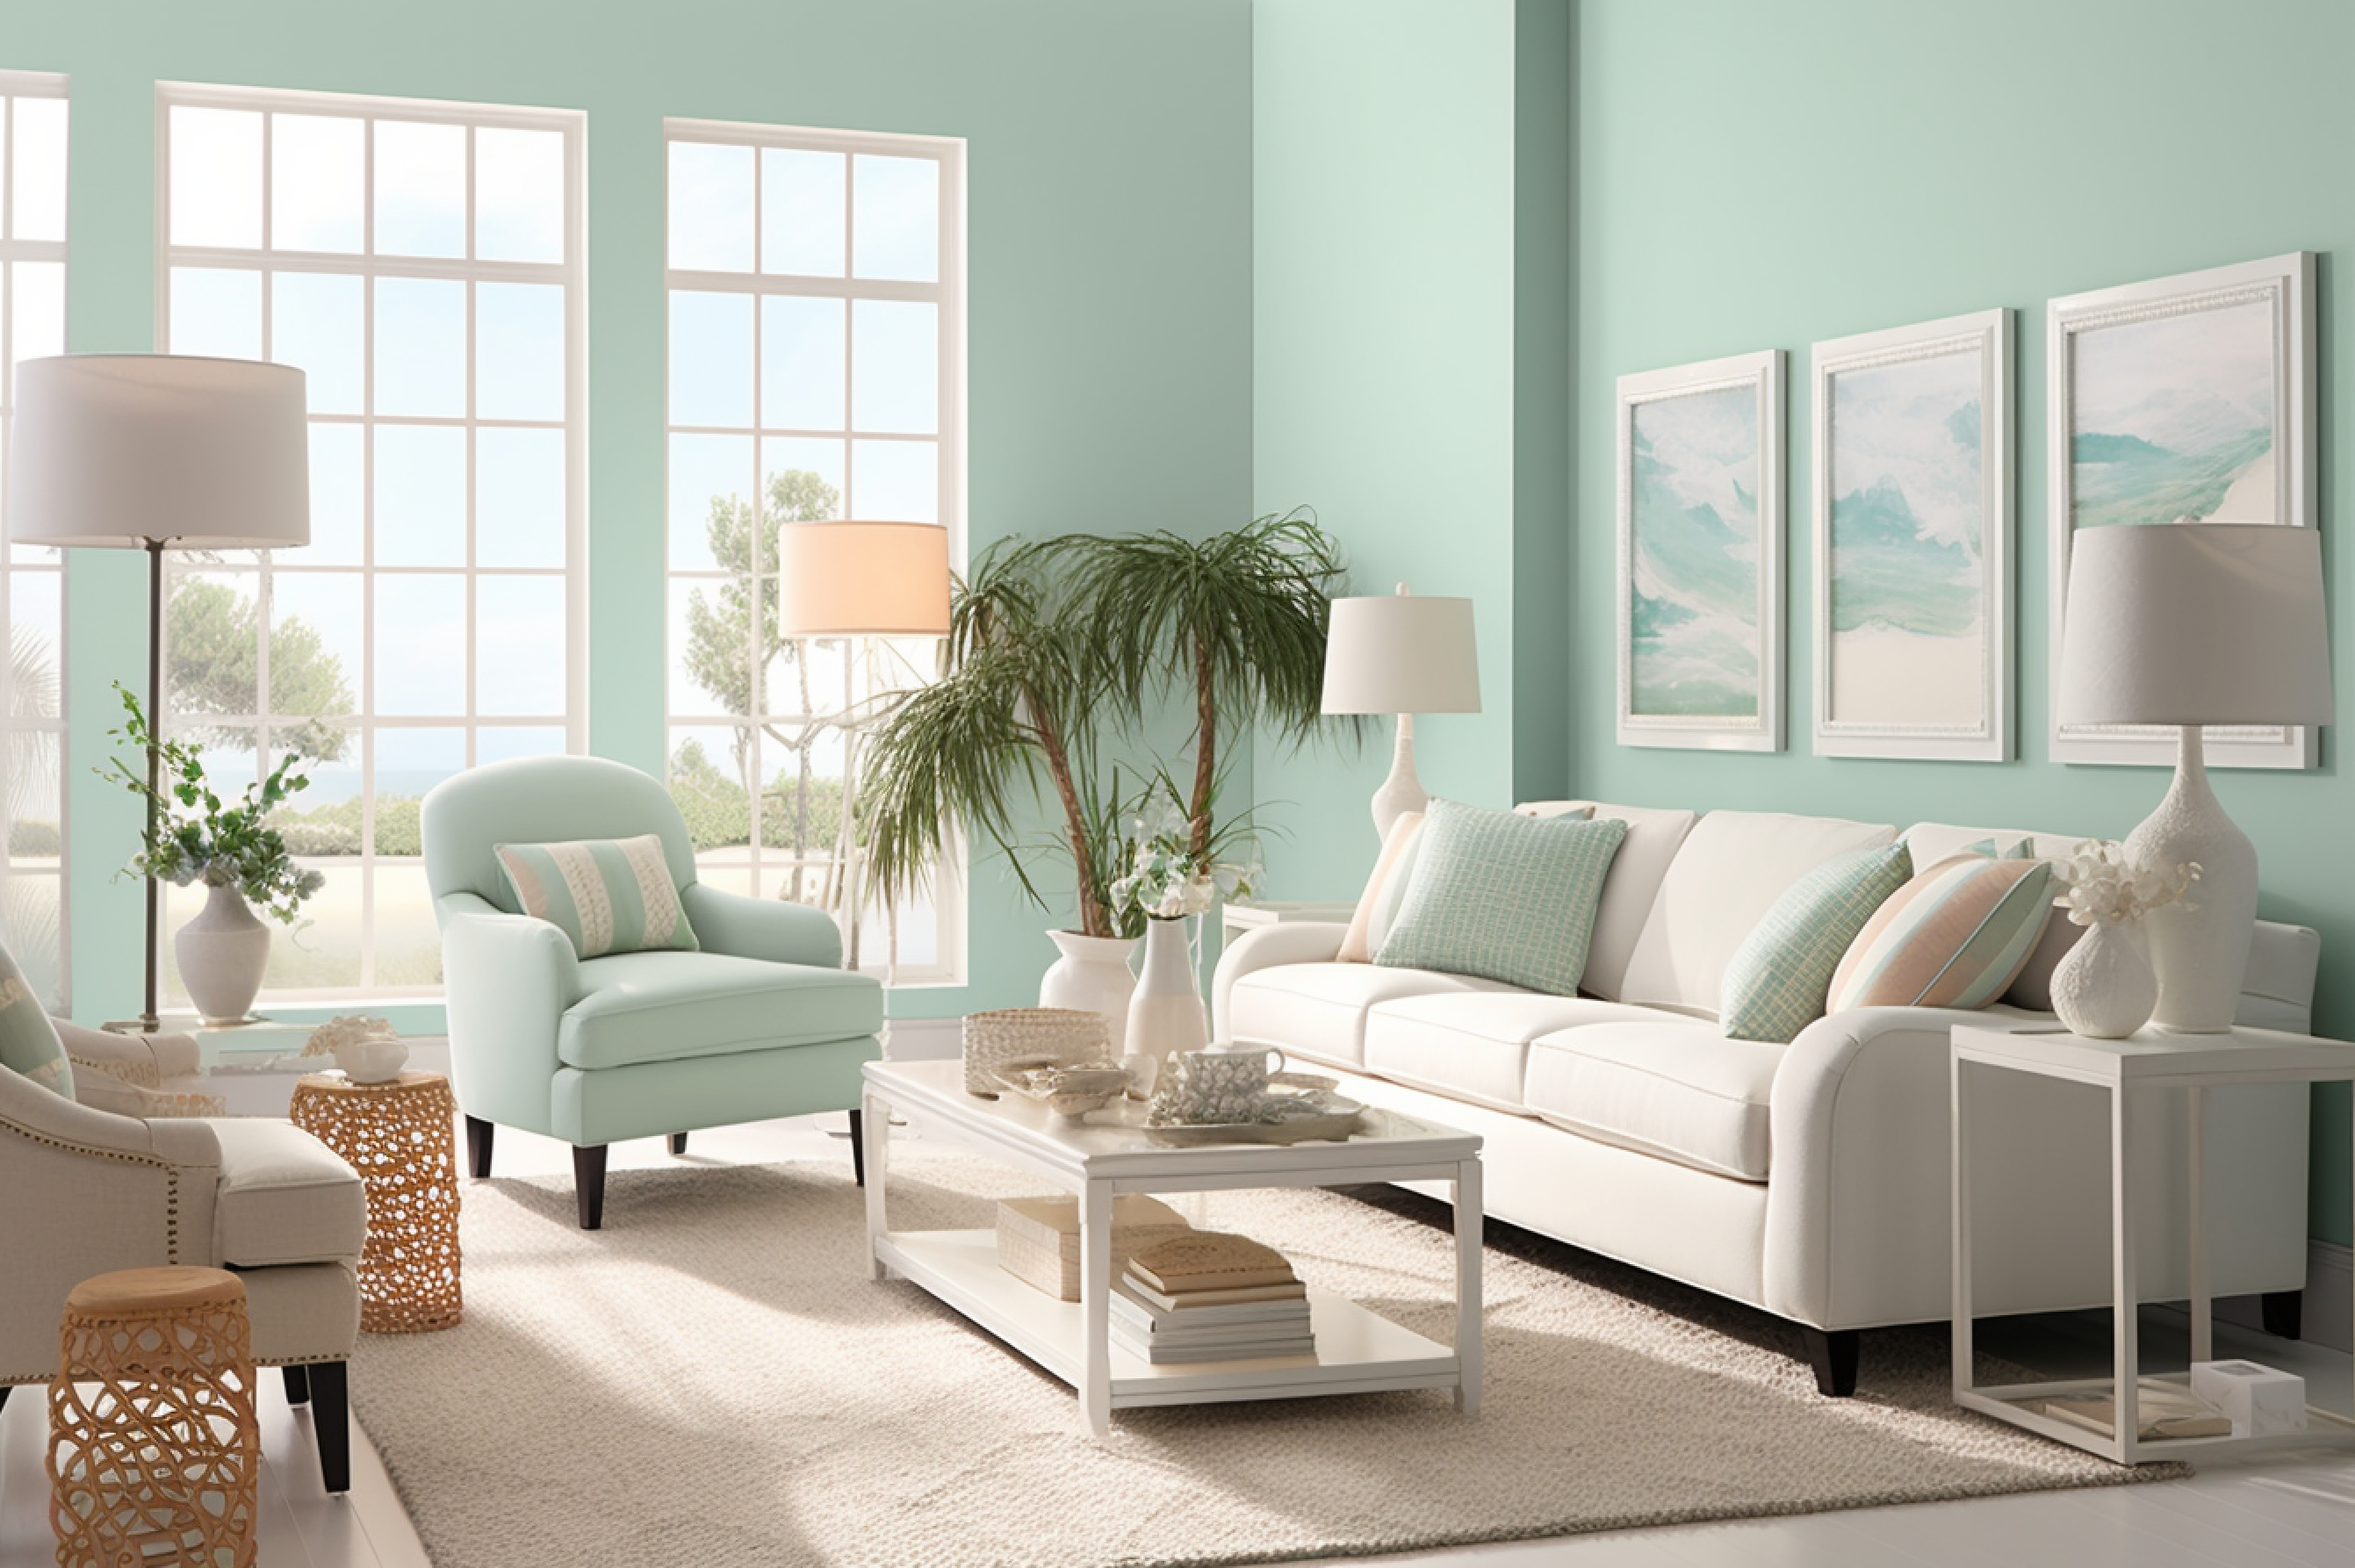 17. Seafoam Green and White Beach Scheme. A living room that makes every day feel like a beach day.